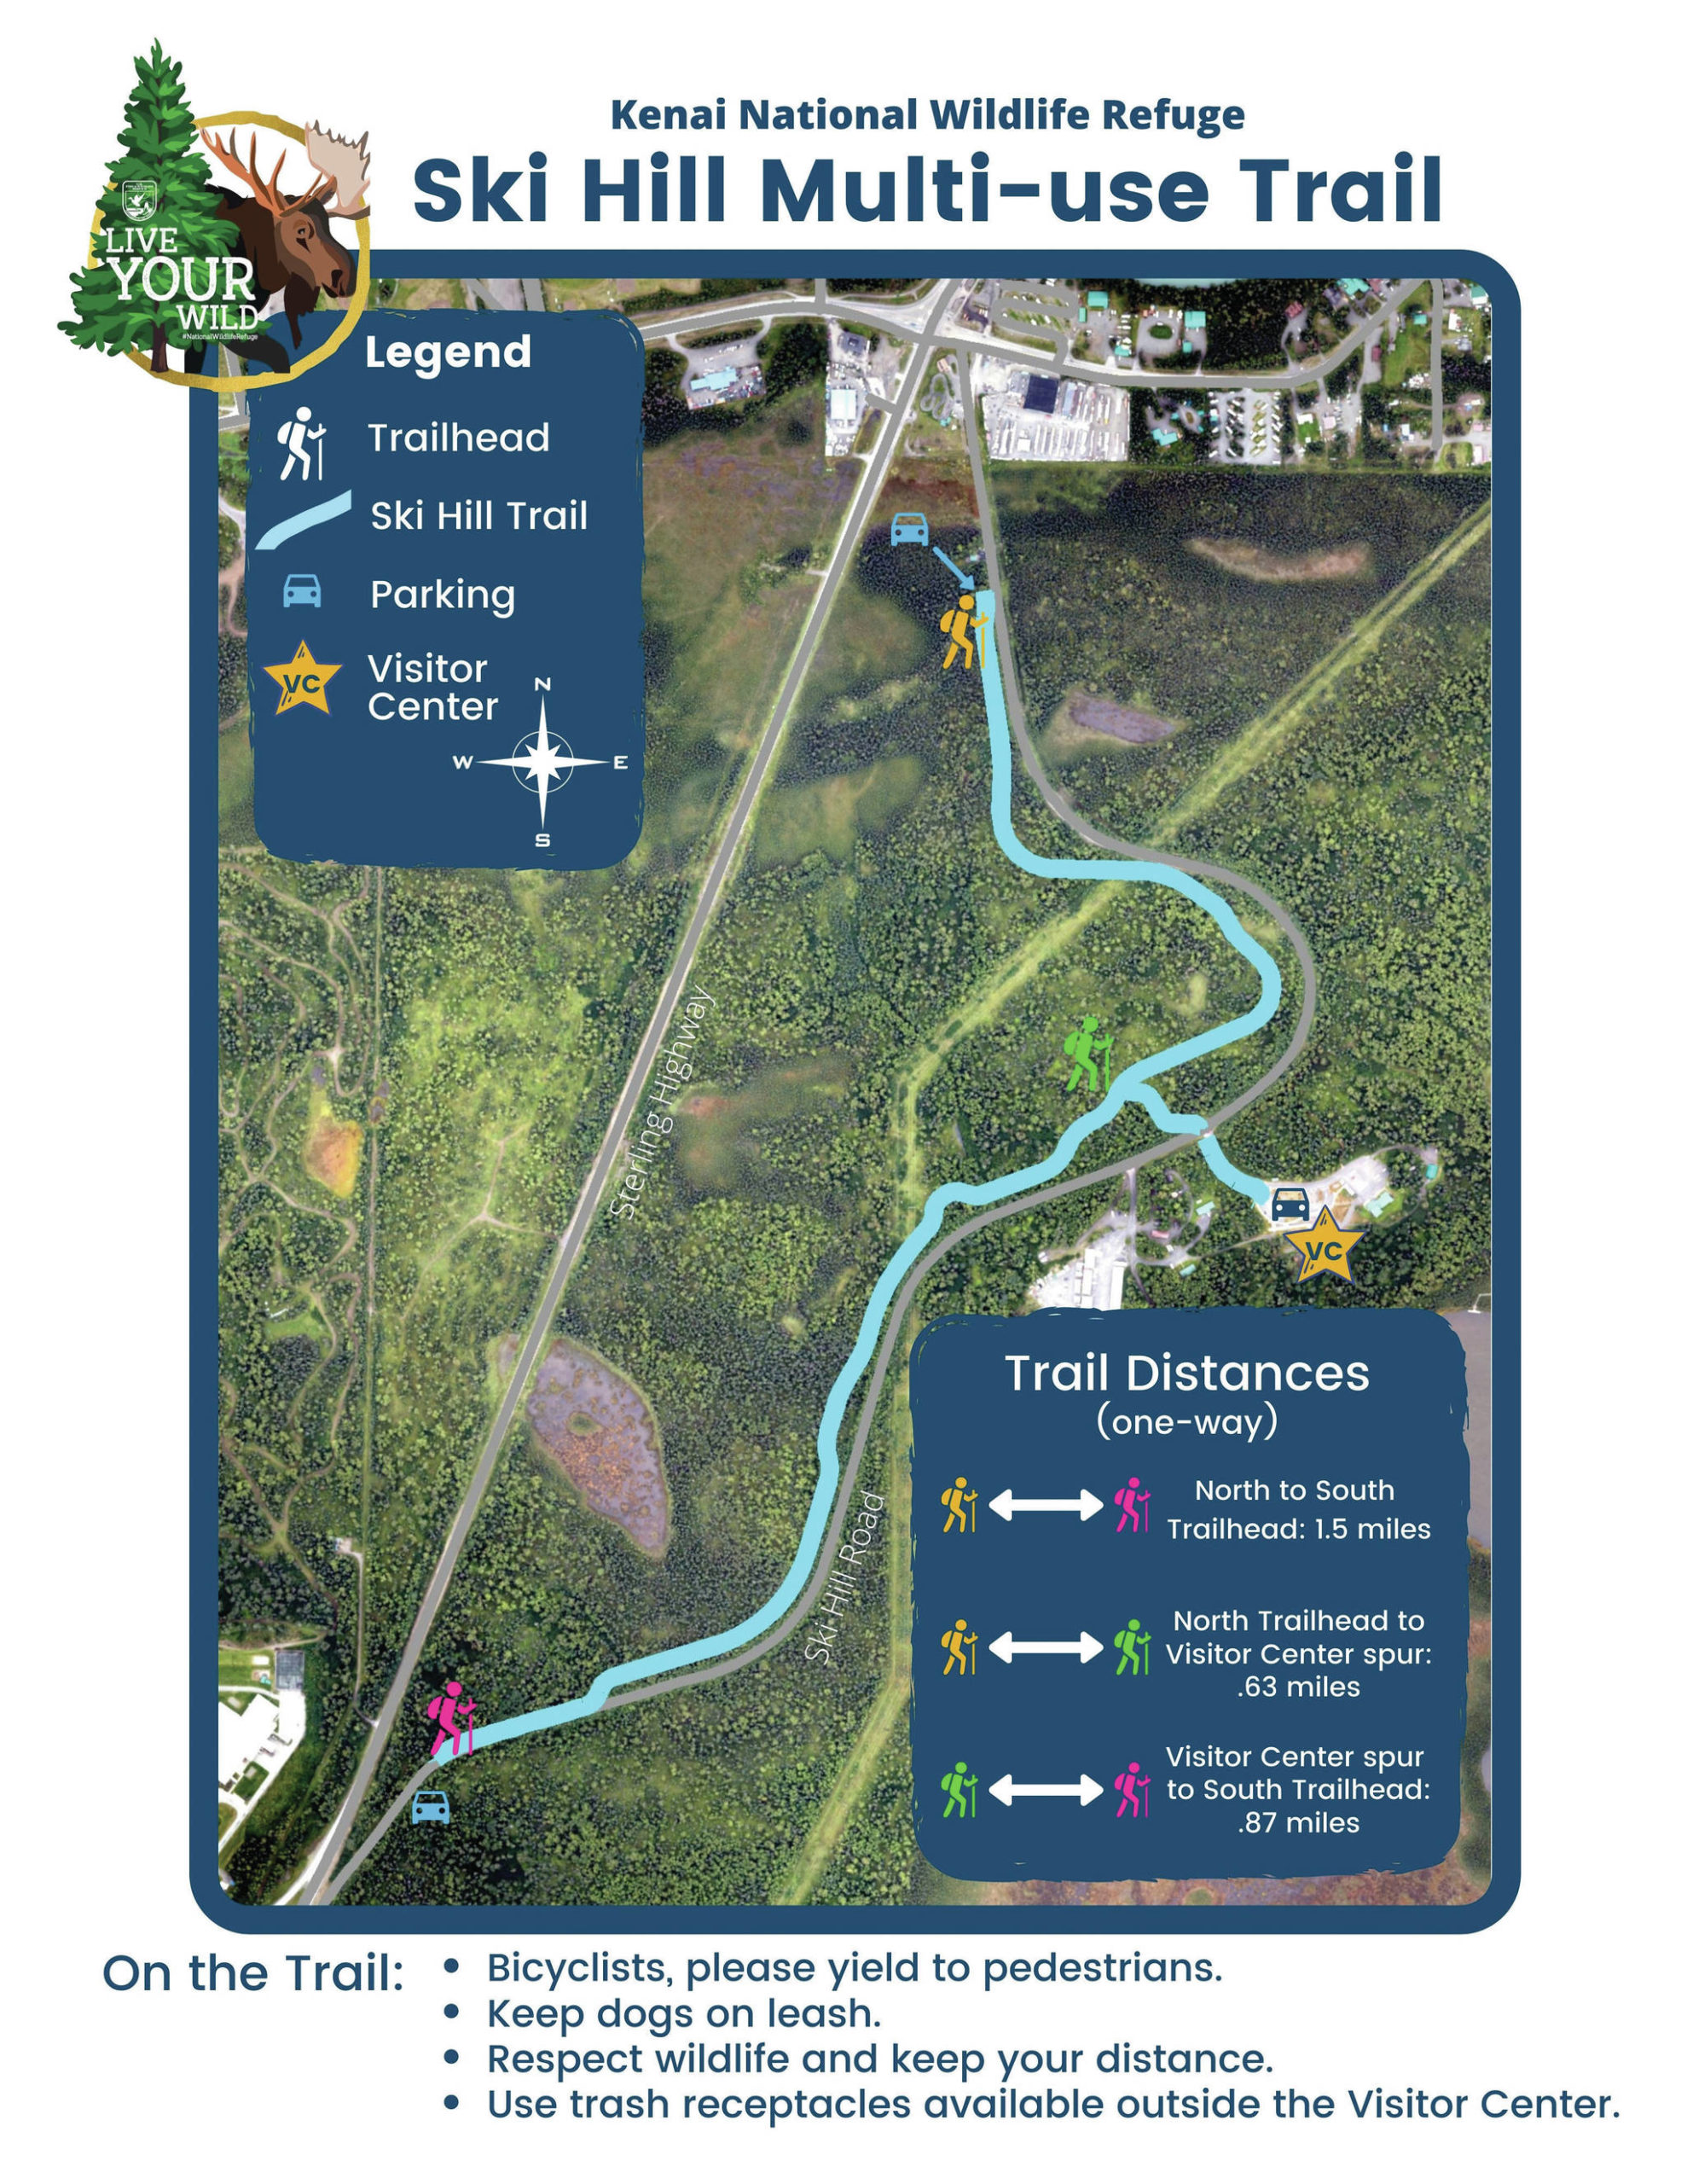 The public is invited to a trail opening event all day Saturday, Sept. 26, 2020, where ranger tents at each trailhead offer activities for all ages. (Map provided by Kenai National Wildlife Refuge)